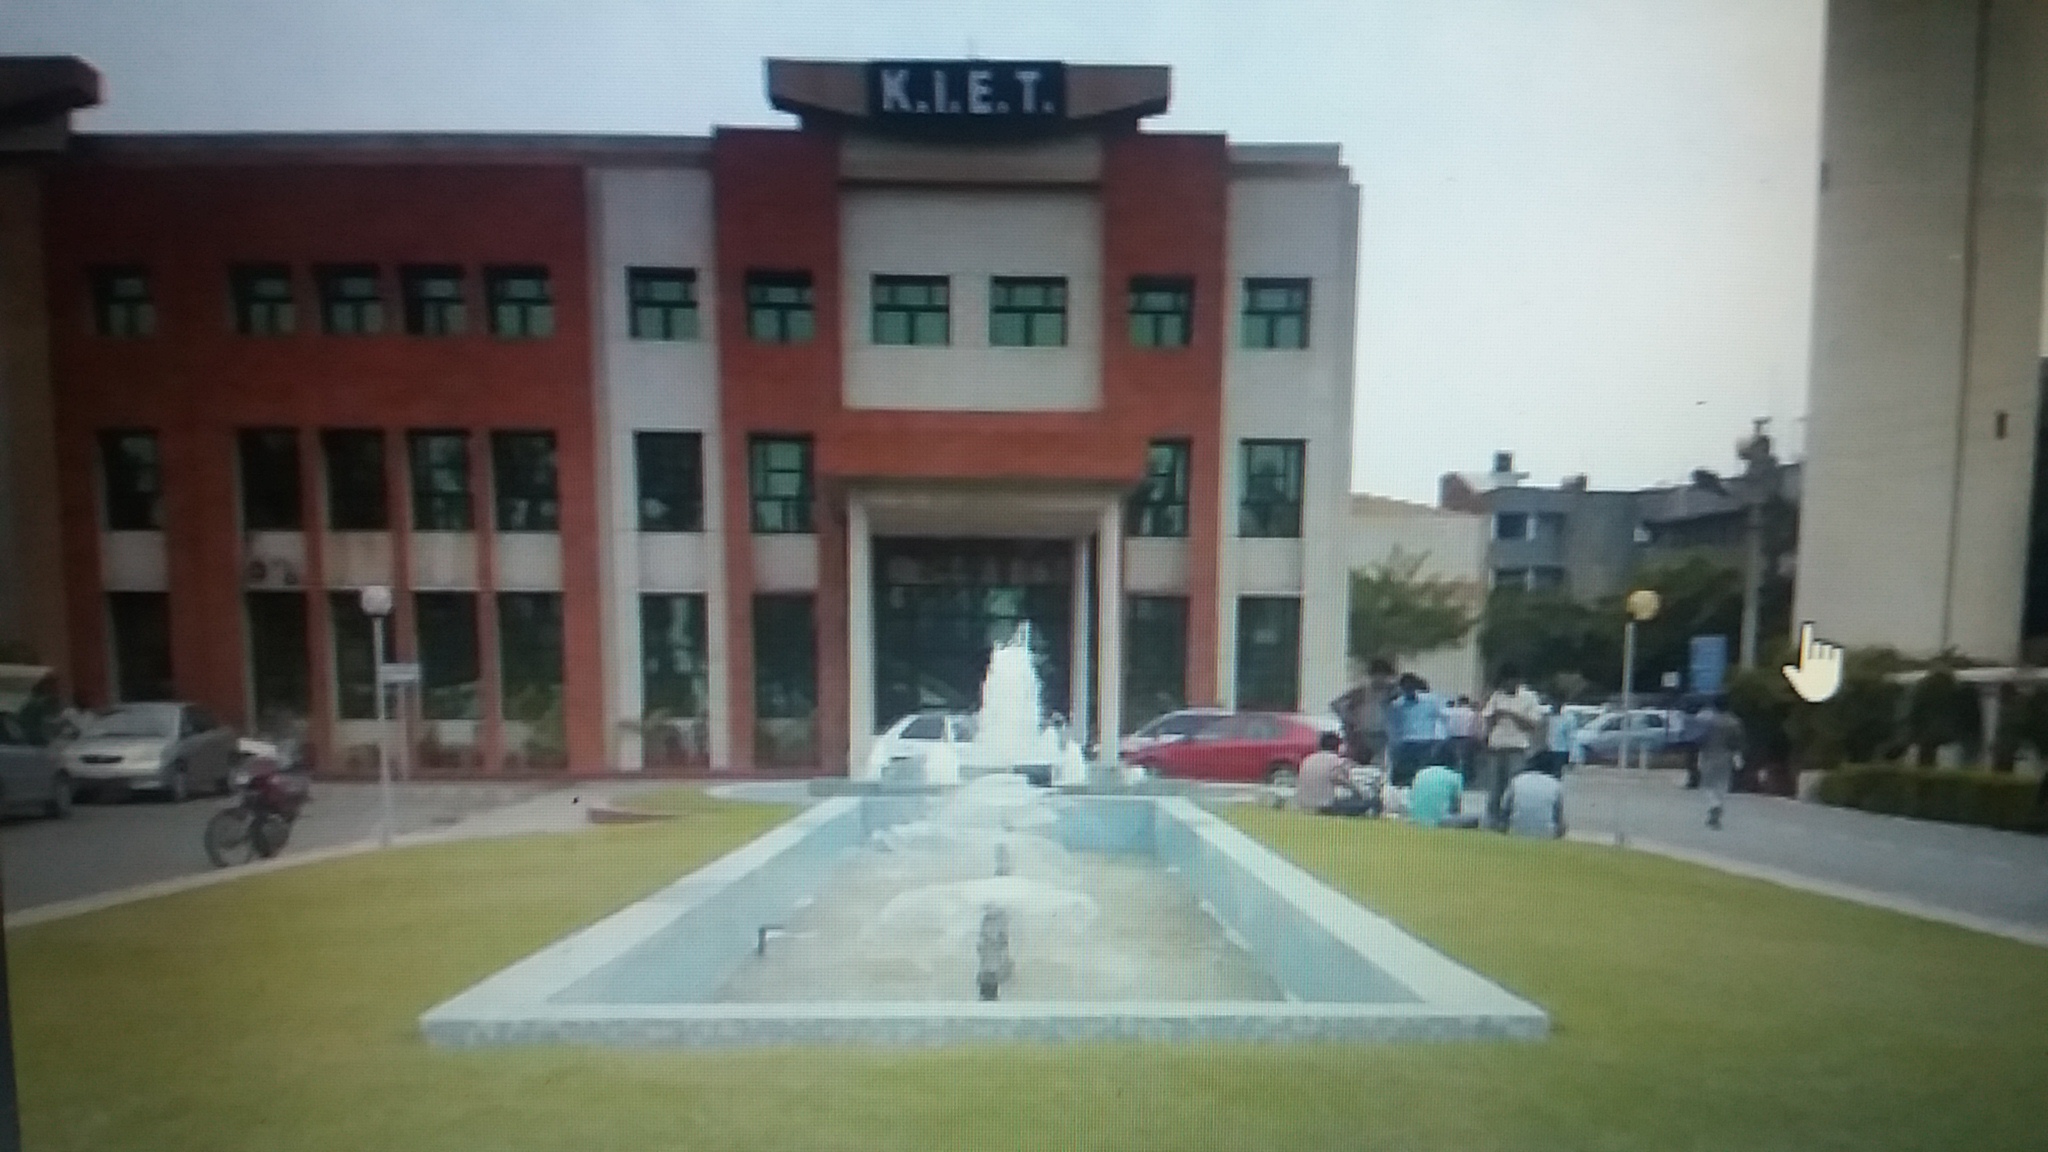 KIET Ghaziabad Genuine Reviews on Placements, Courses, Faculty \u0026 Facilities